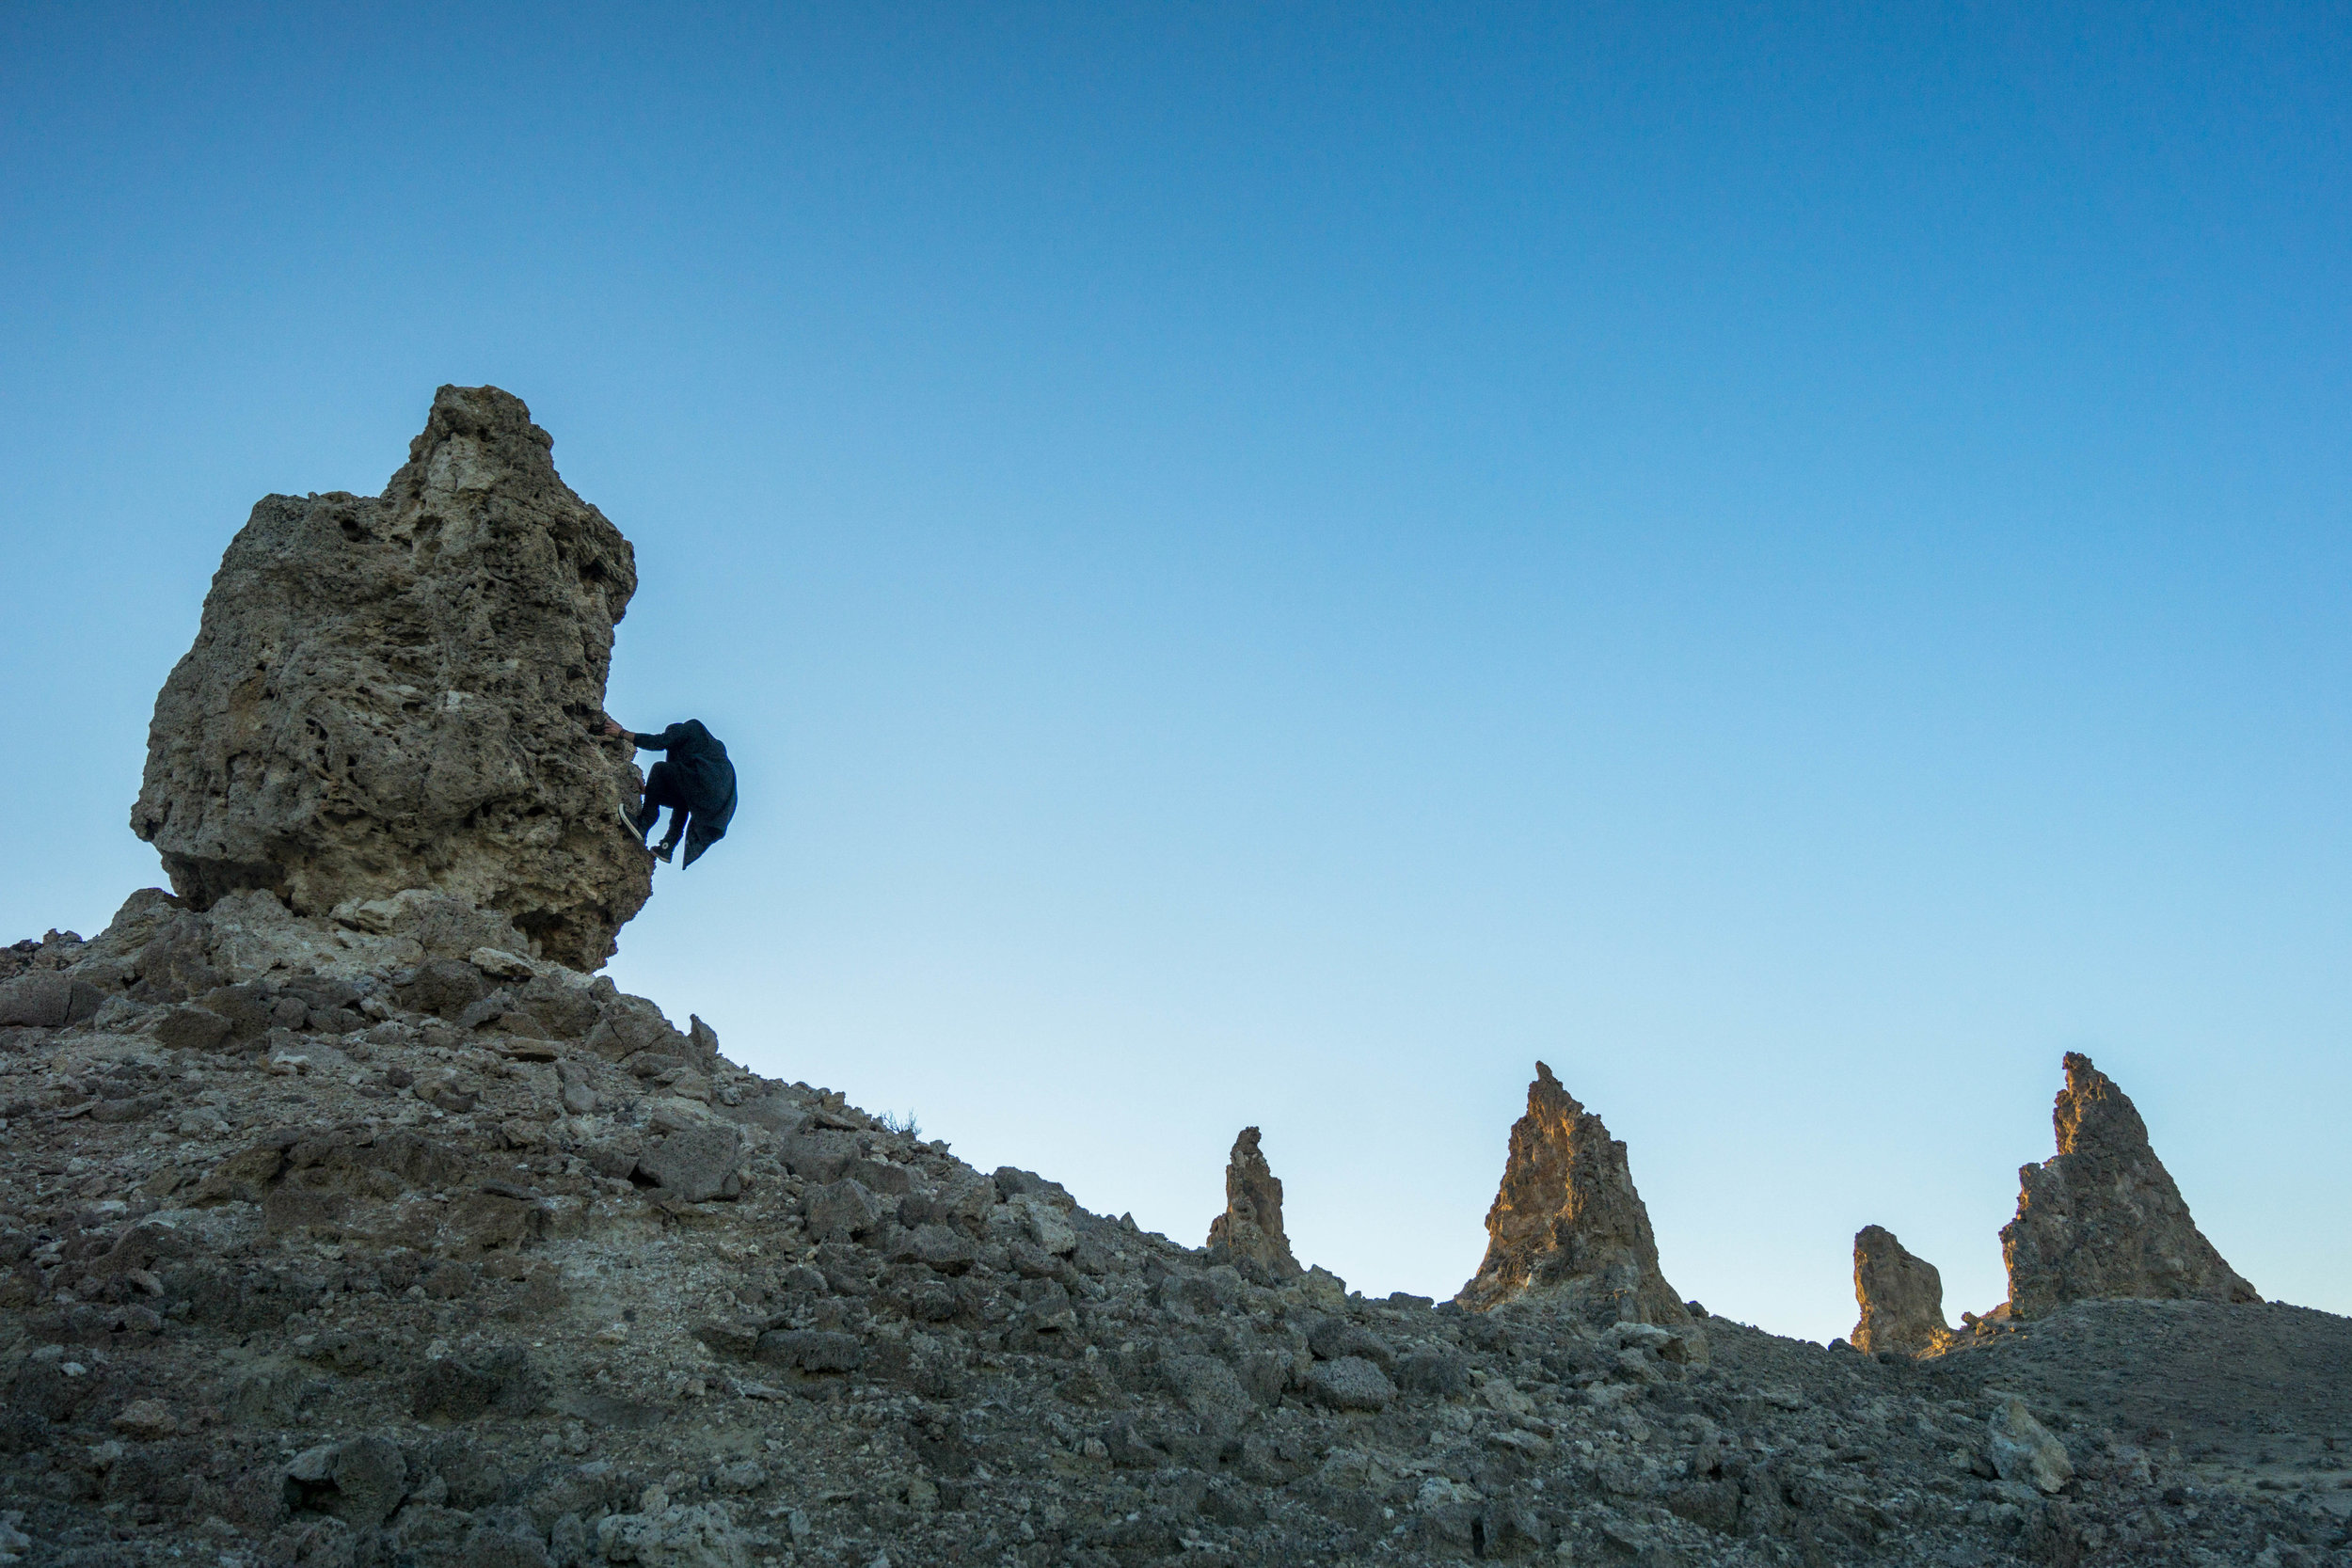 Each separate pinnacle offered up a new perspective of the otherworldly topography.